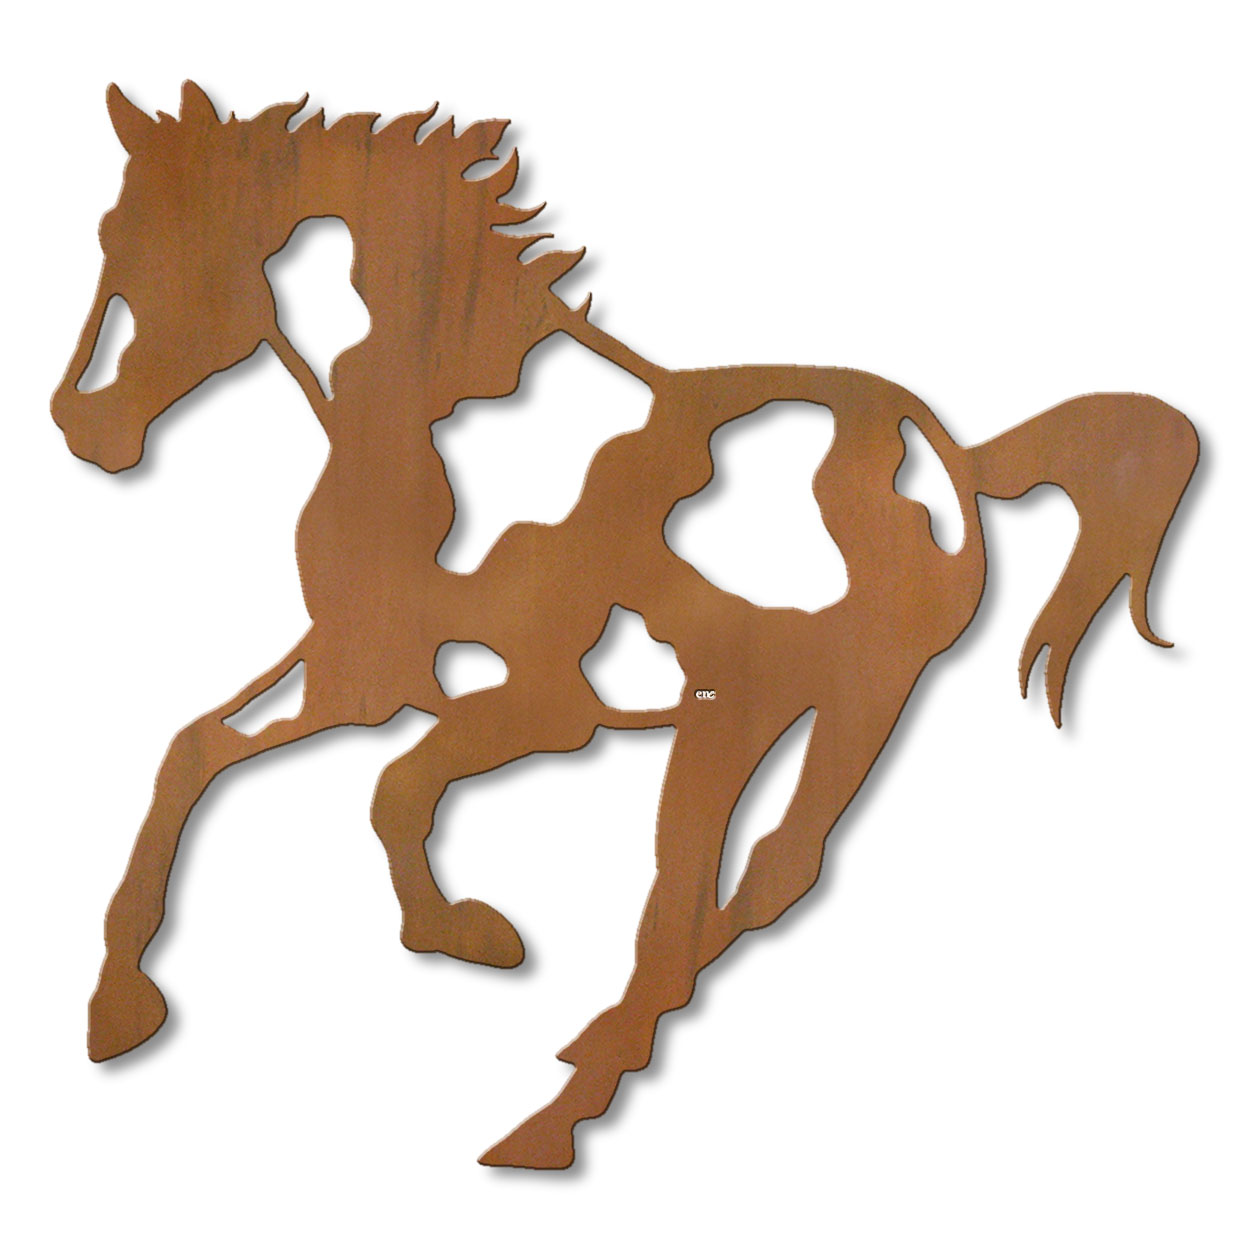 625416r - 18 or 24in Metal Wall Art - Paint Pony - Rust Patina